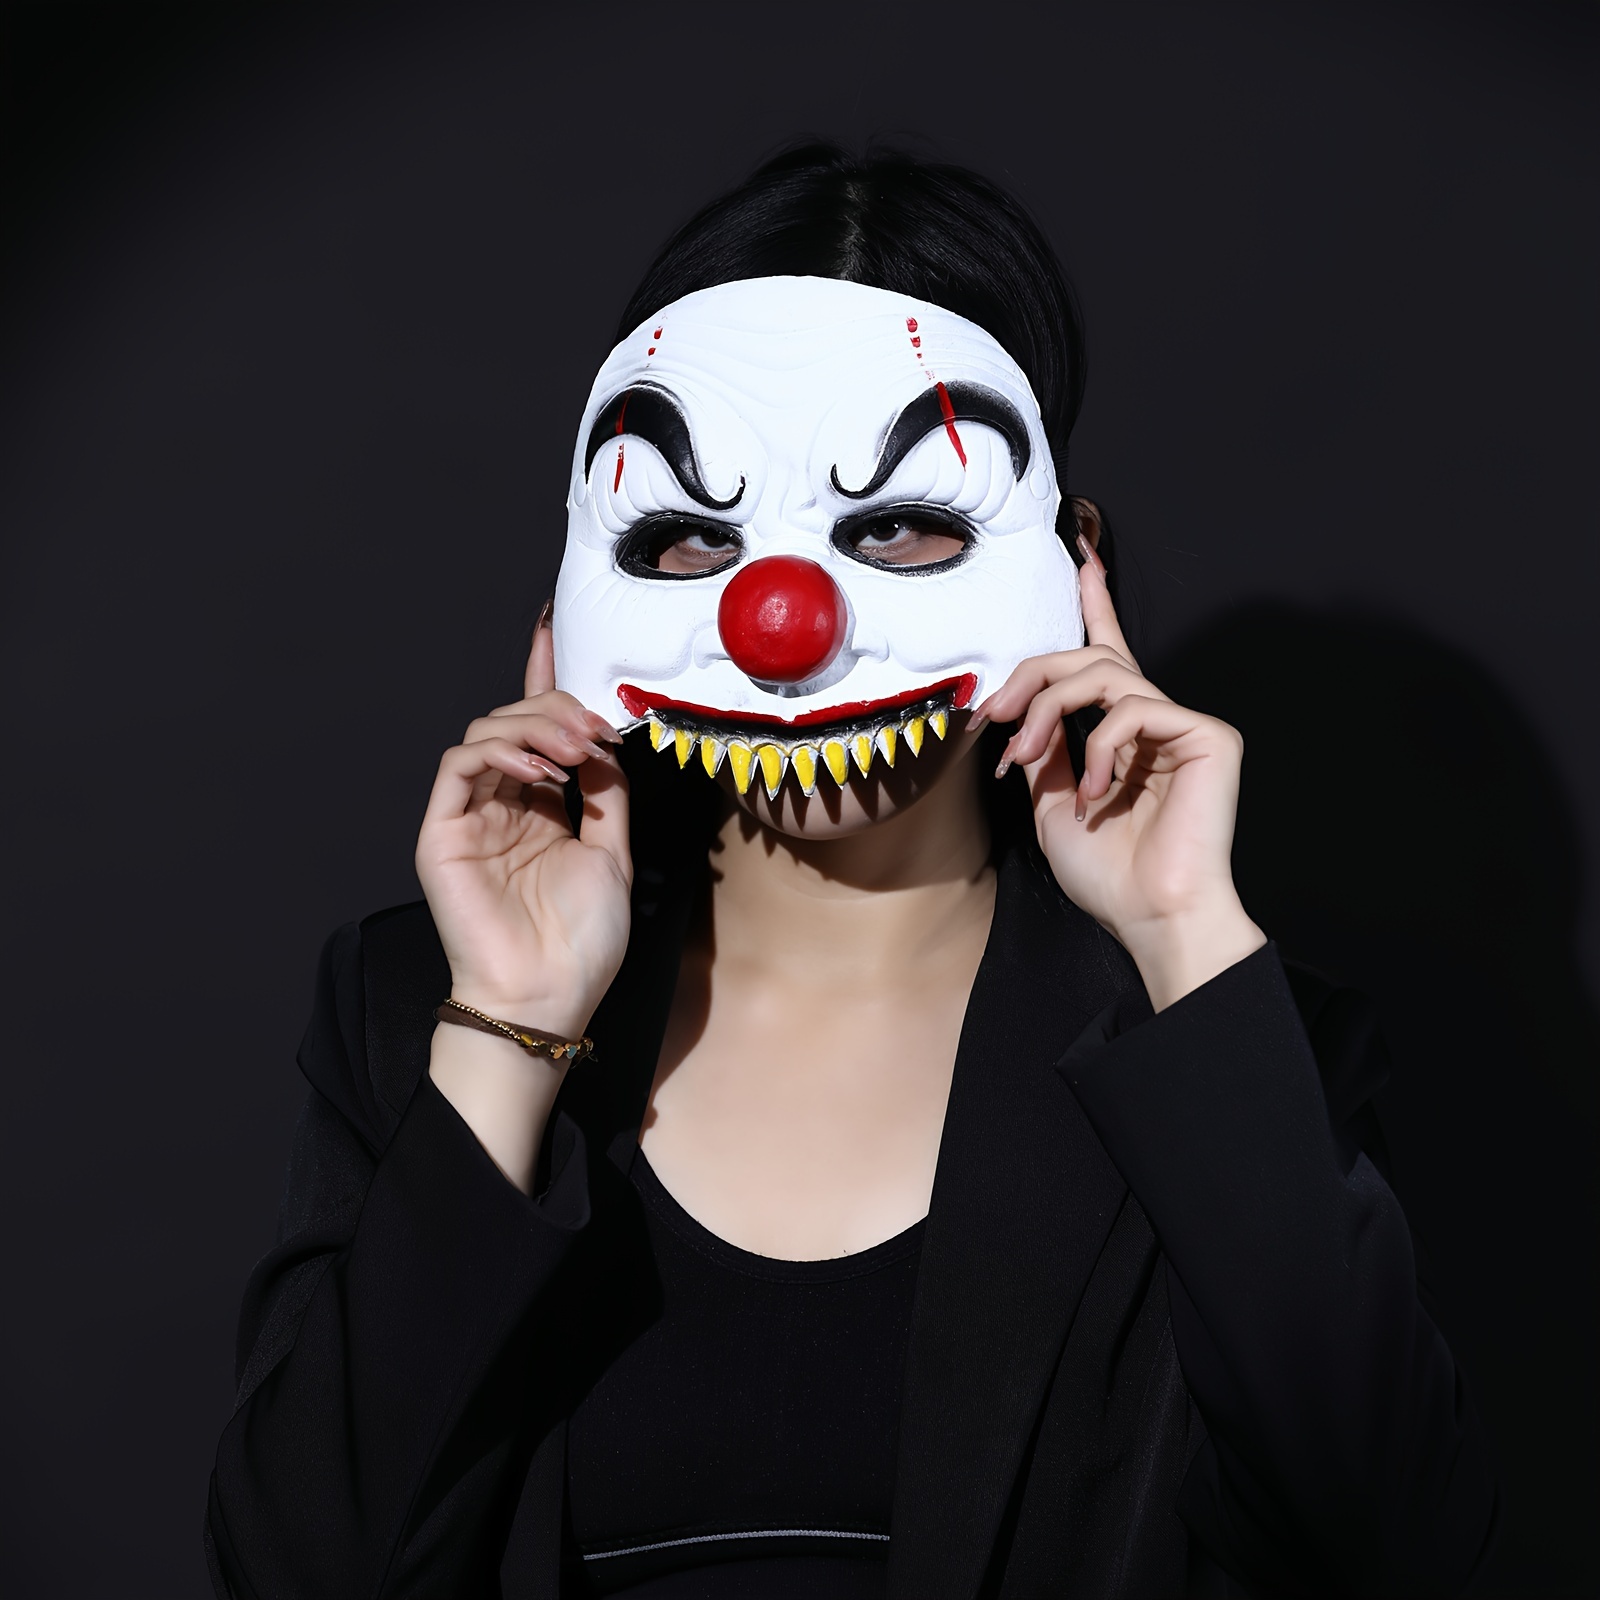 Halloween Makeup Like Pennywise. Street performer clown with a white face.  The look of a man in the guise of IT on a costume cosplay show. Close-up.  Stock Photo